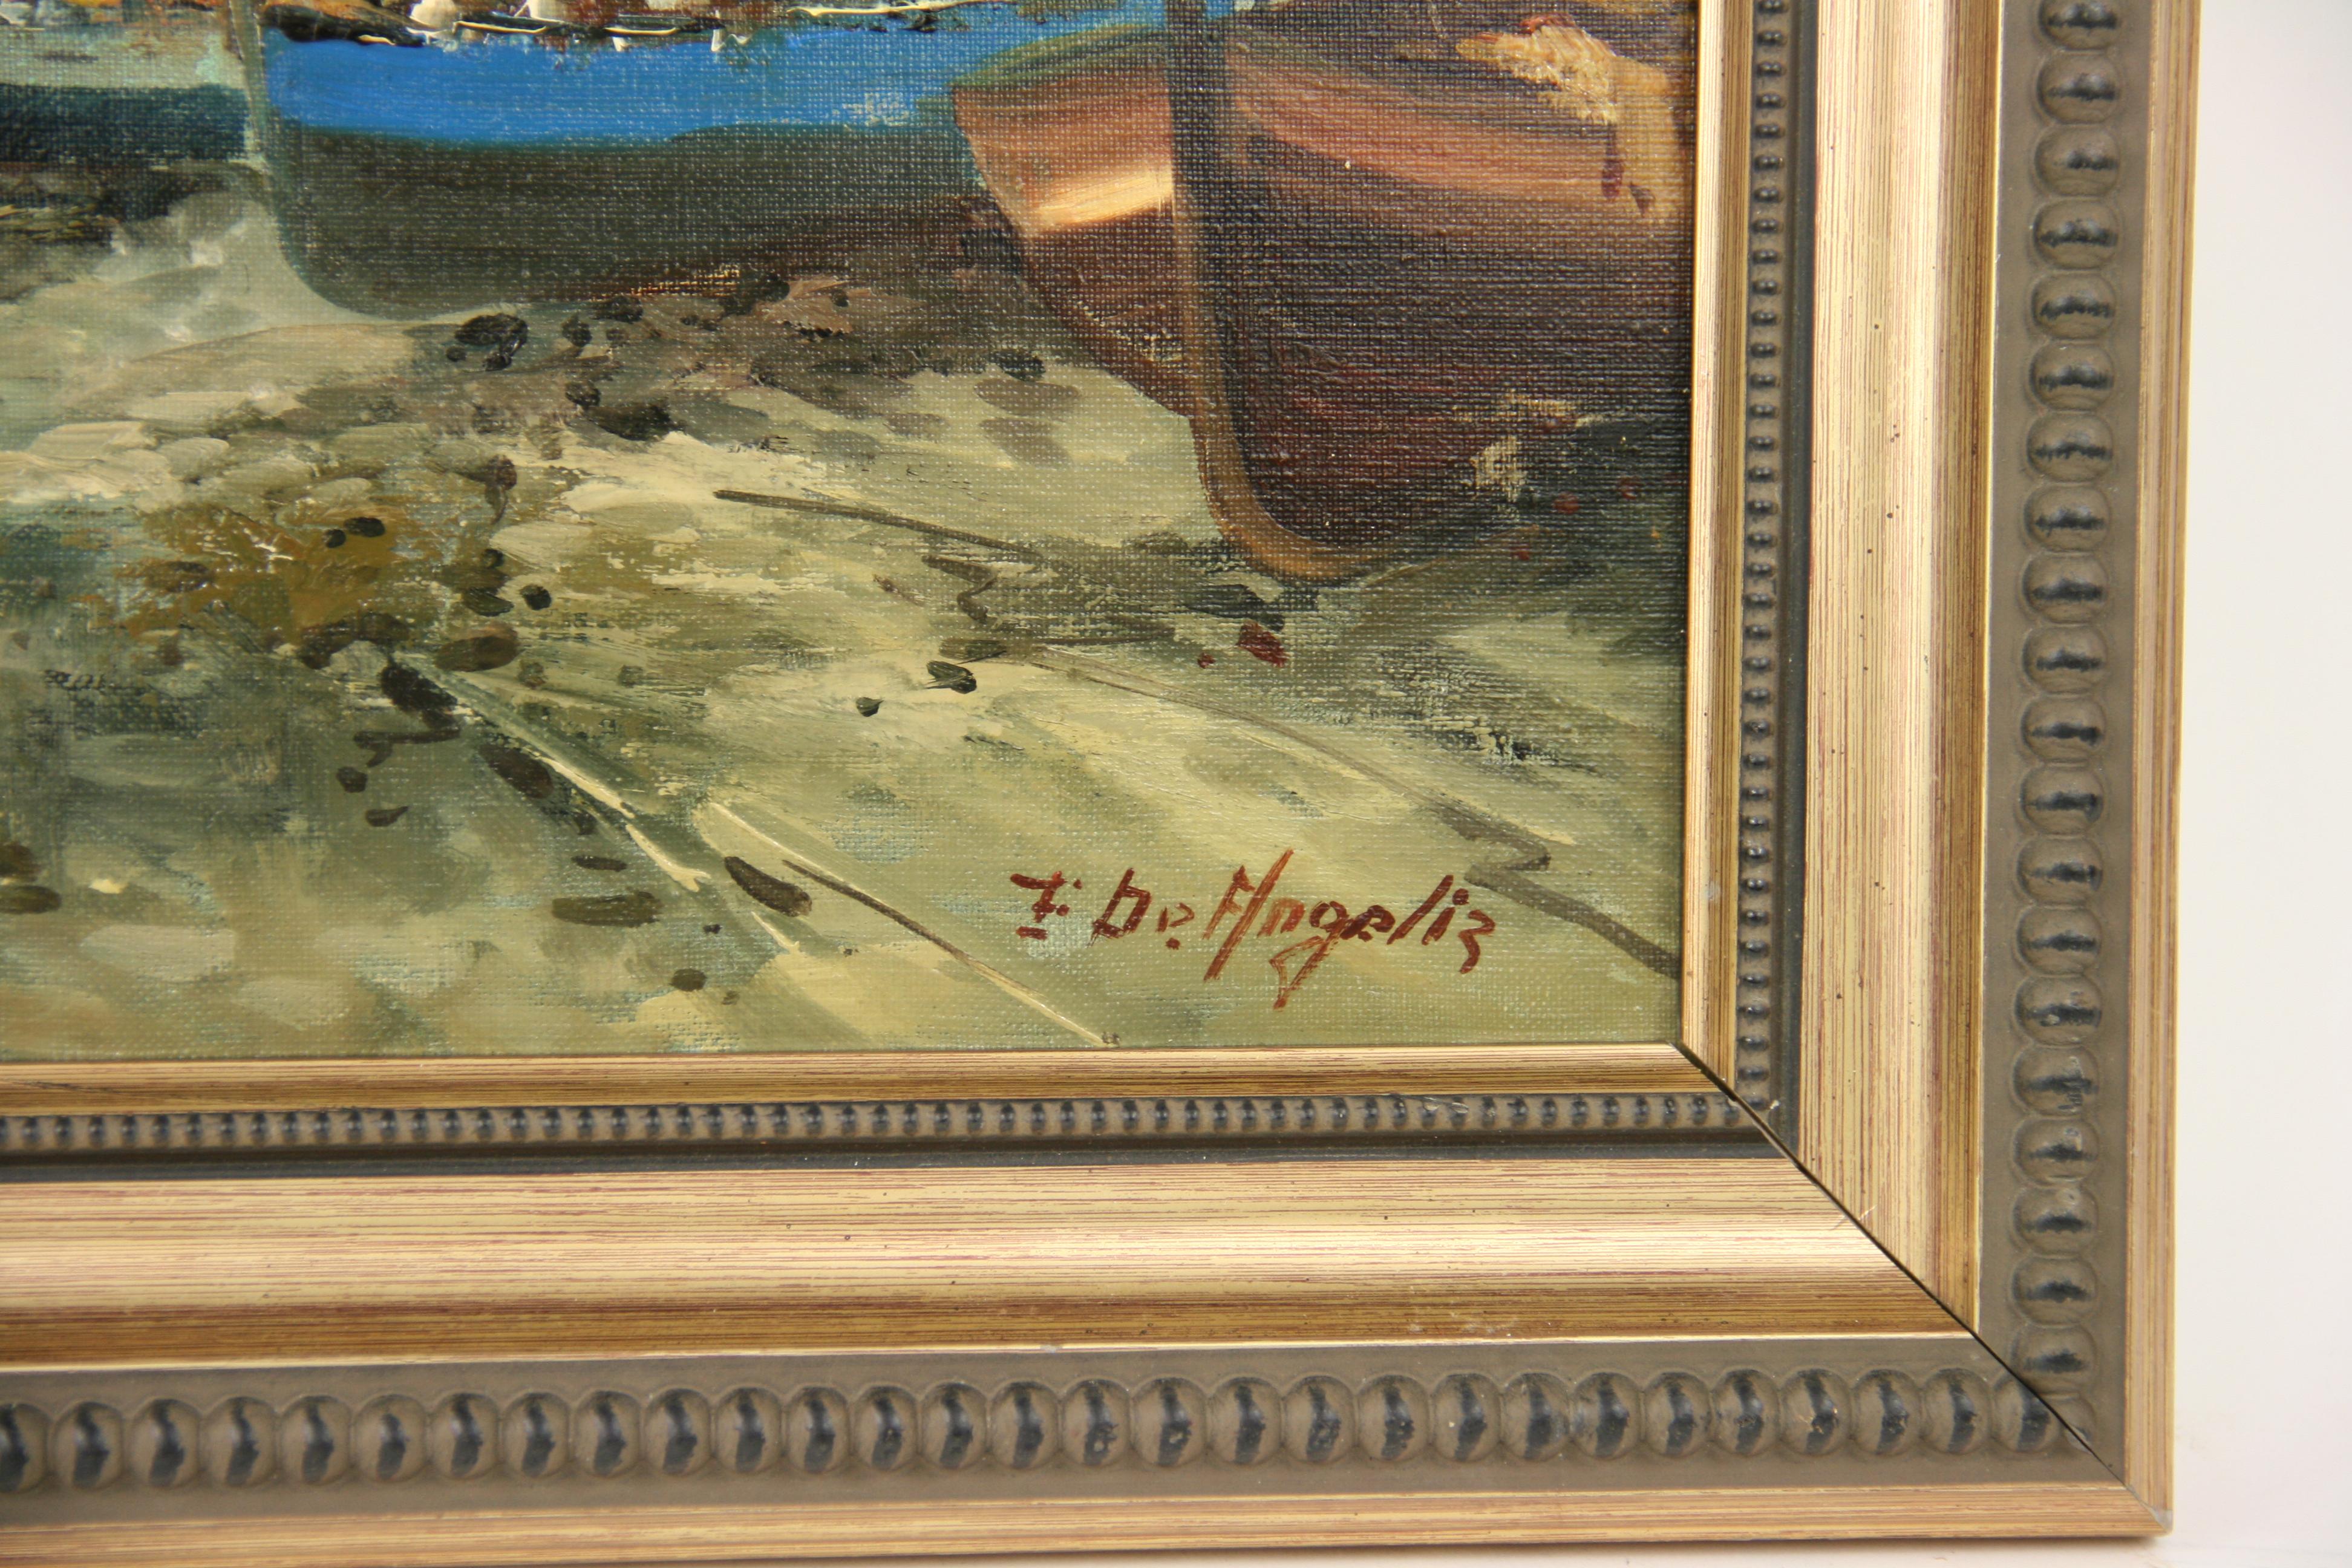 #5-3100 Italian Seascape painting, oil on canvas applied to a board signed by De Angelis, displayed in a giltwood frame. Image size 10.5 H x 13.5 W.